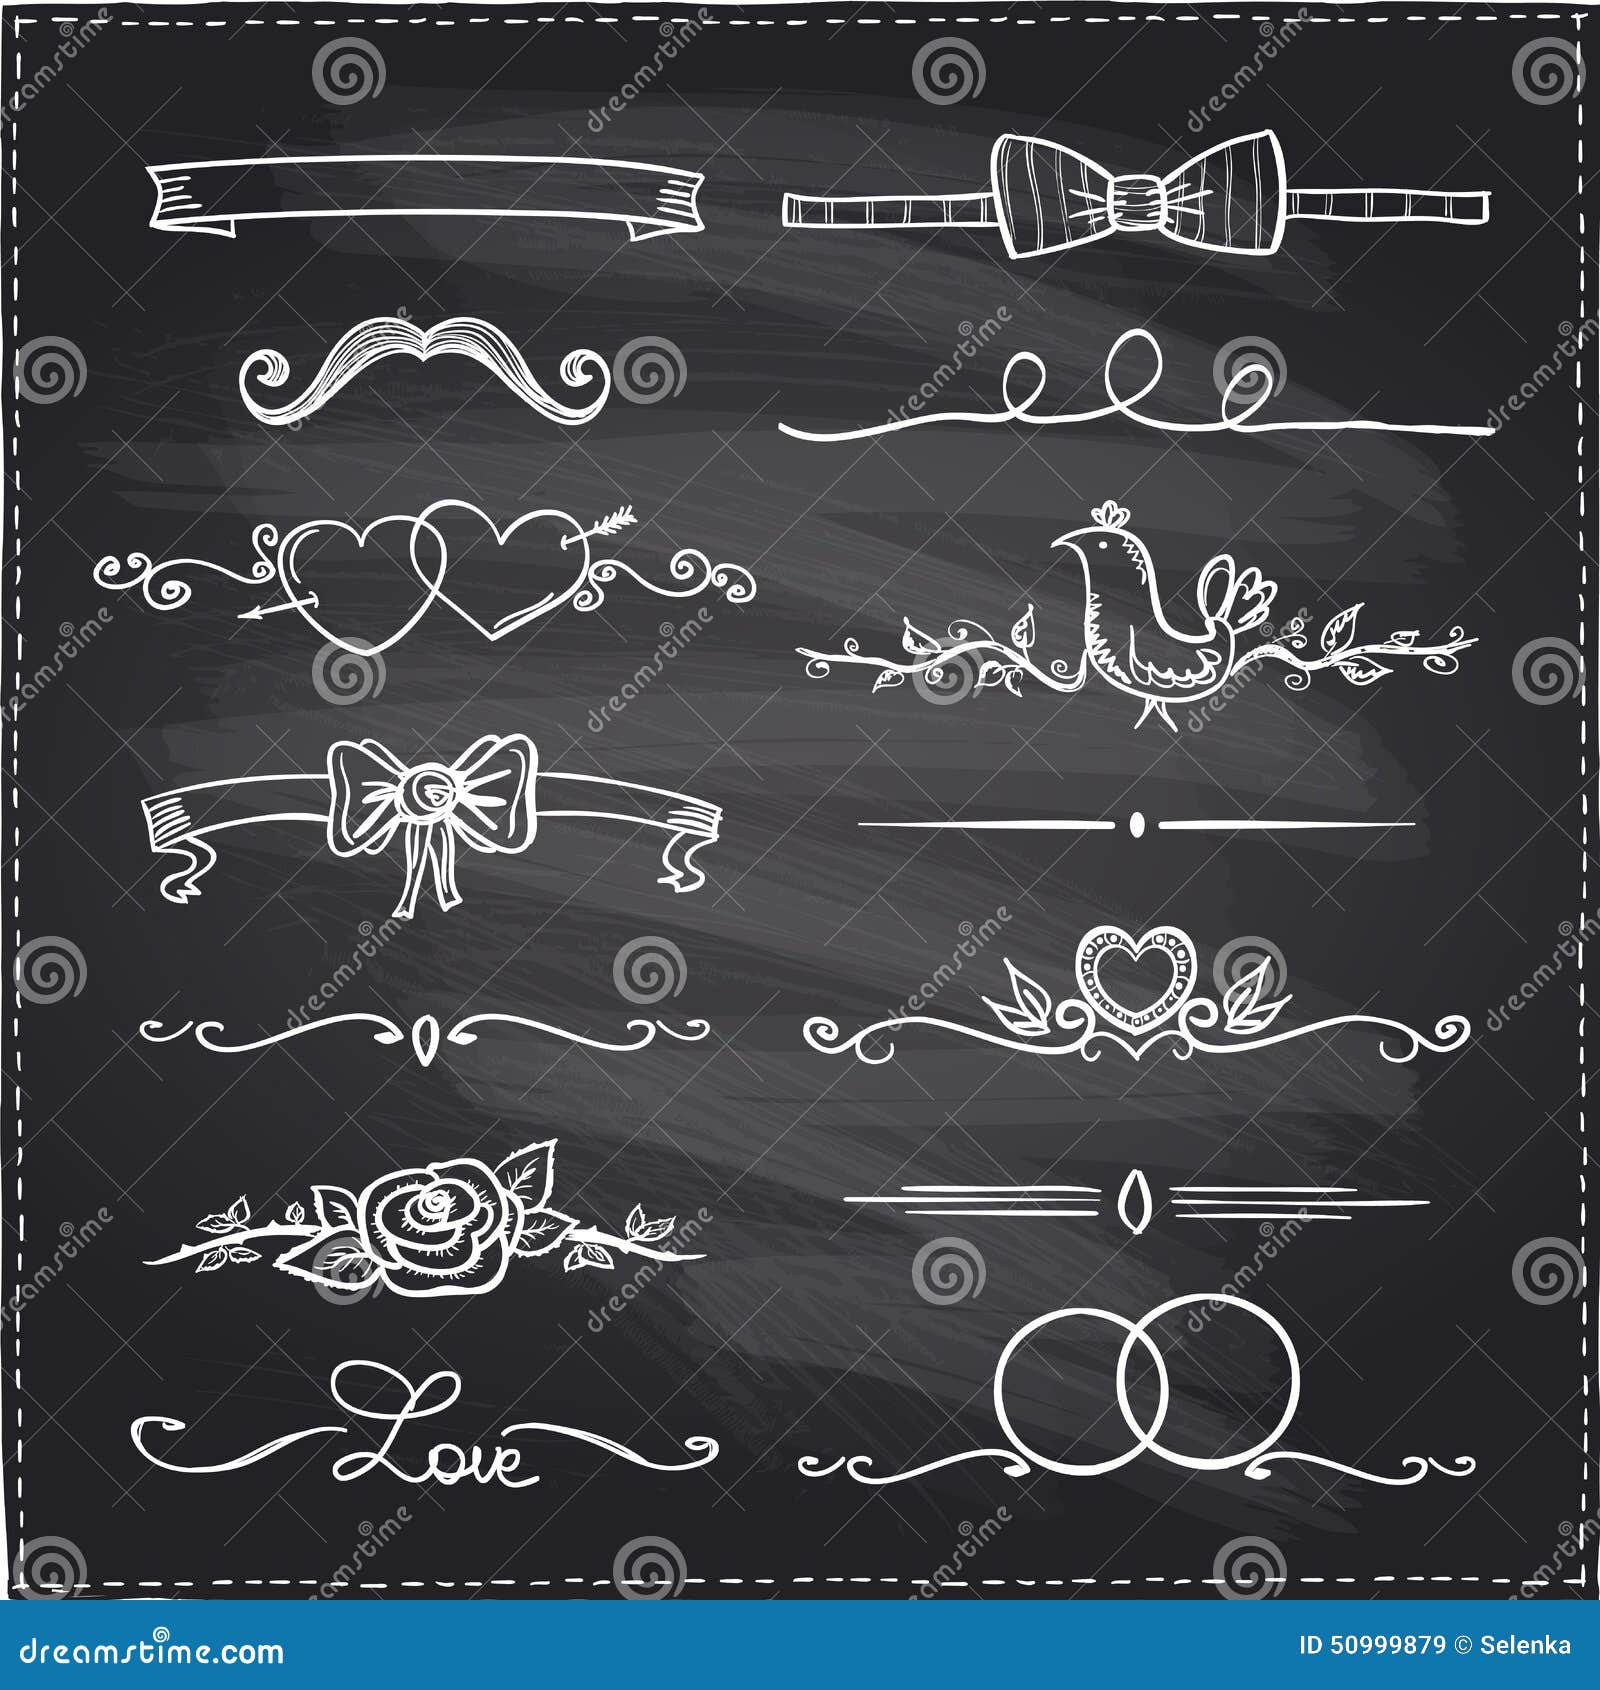 chalkboard clipart download free - photo #24